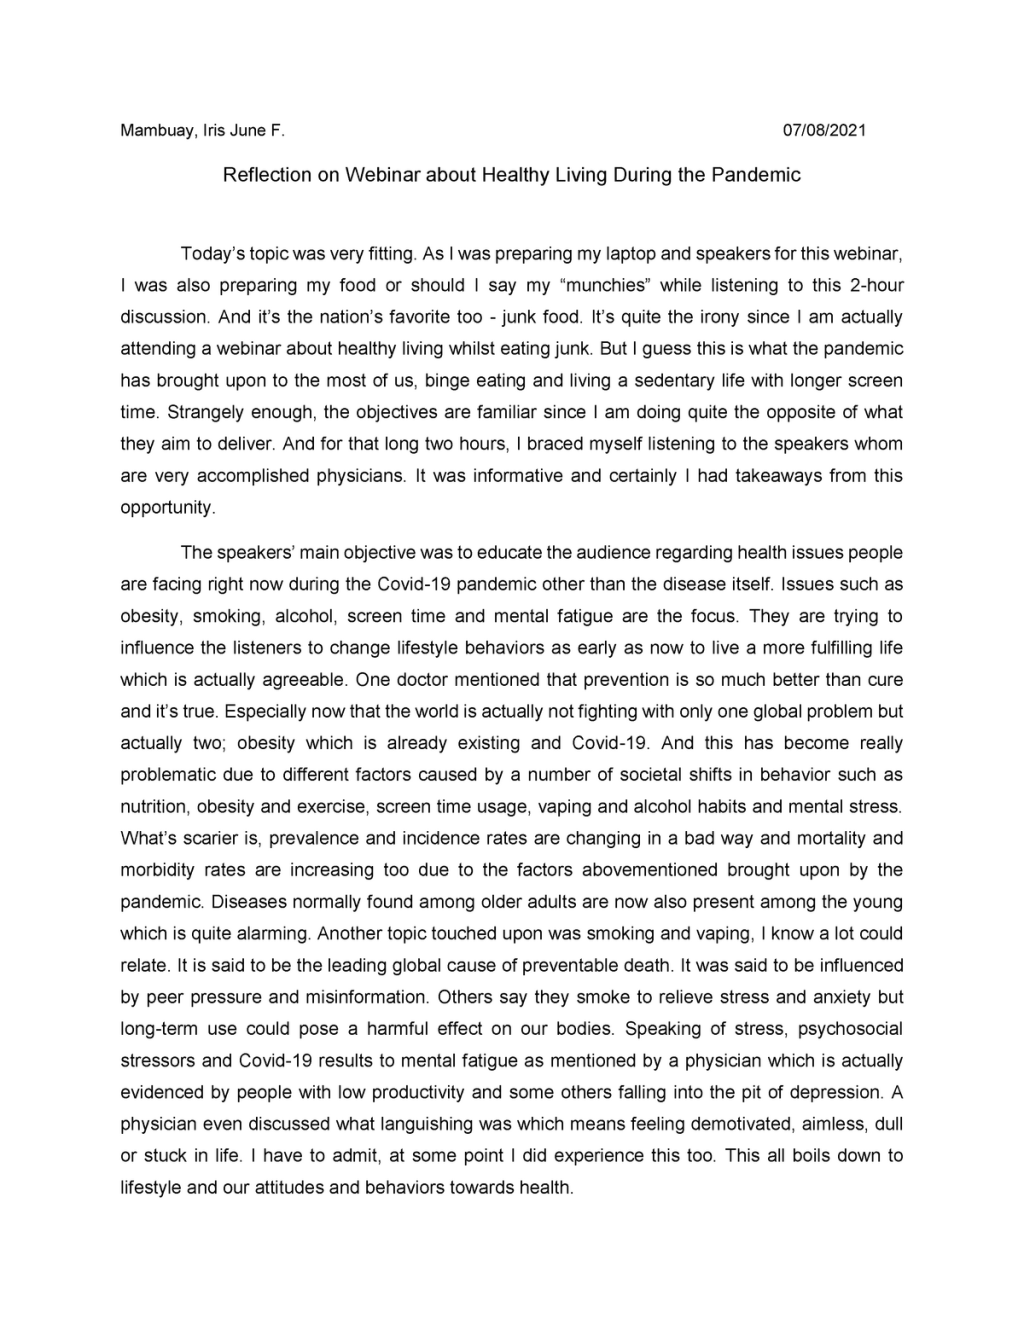 Picture of: Reflection on Webinar about Healthy Living During the Pandemic